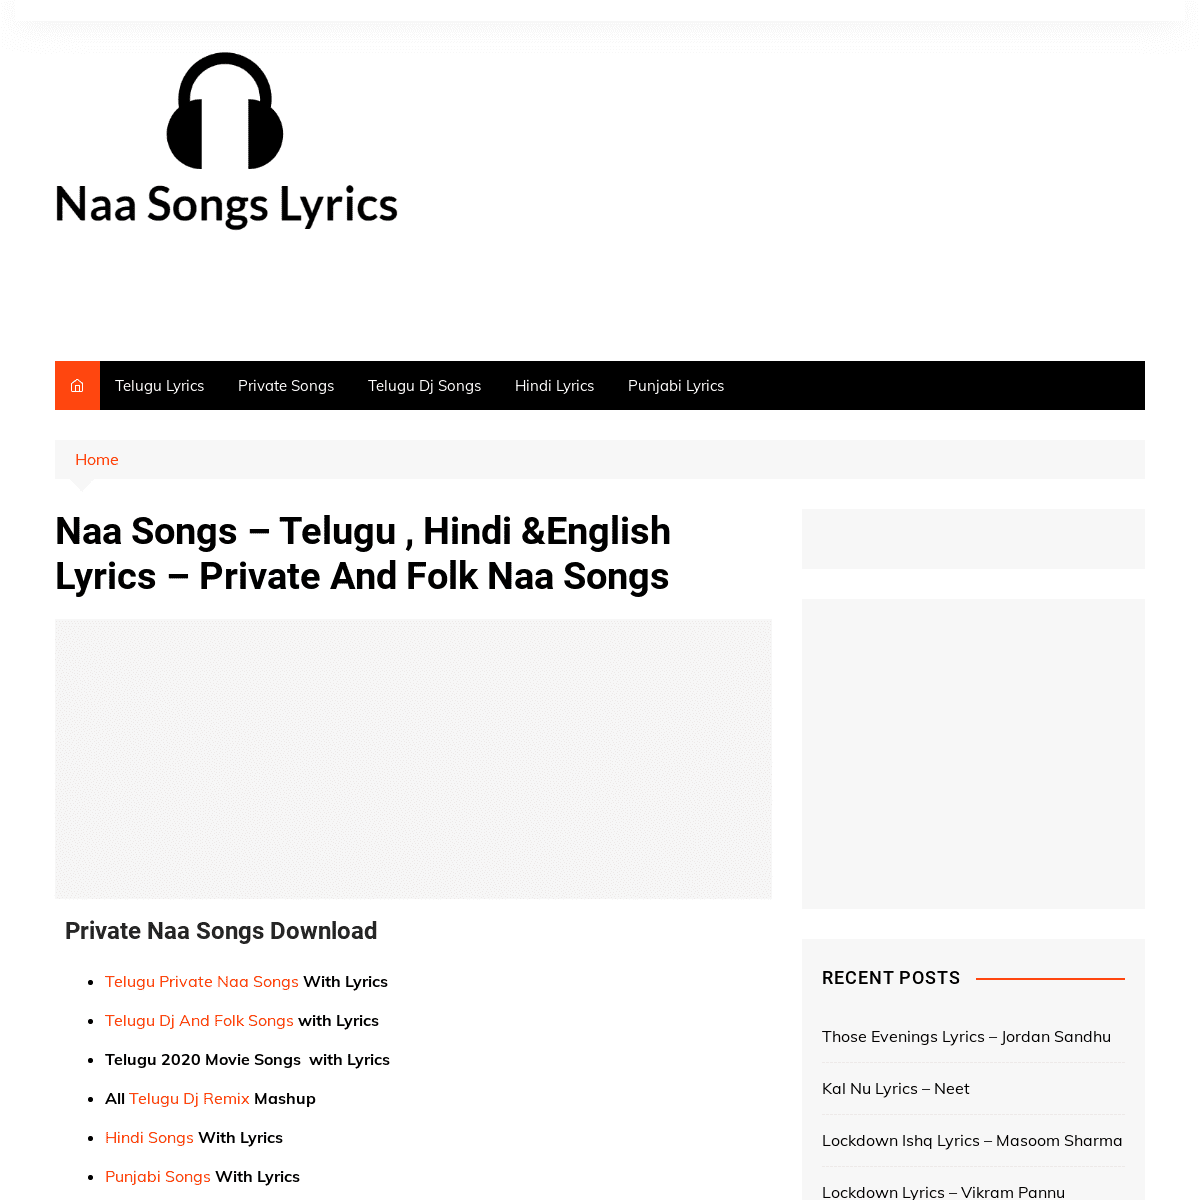 A complete backup of naasong.co.in